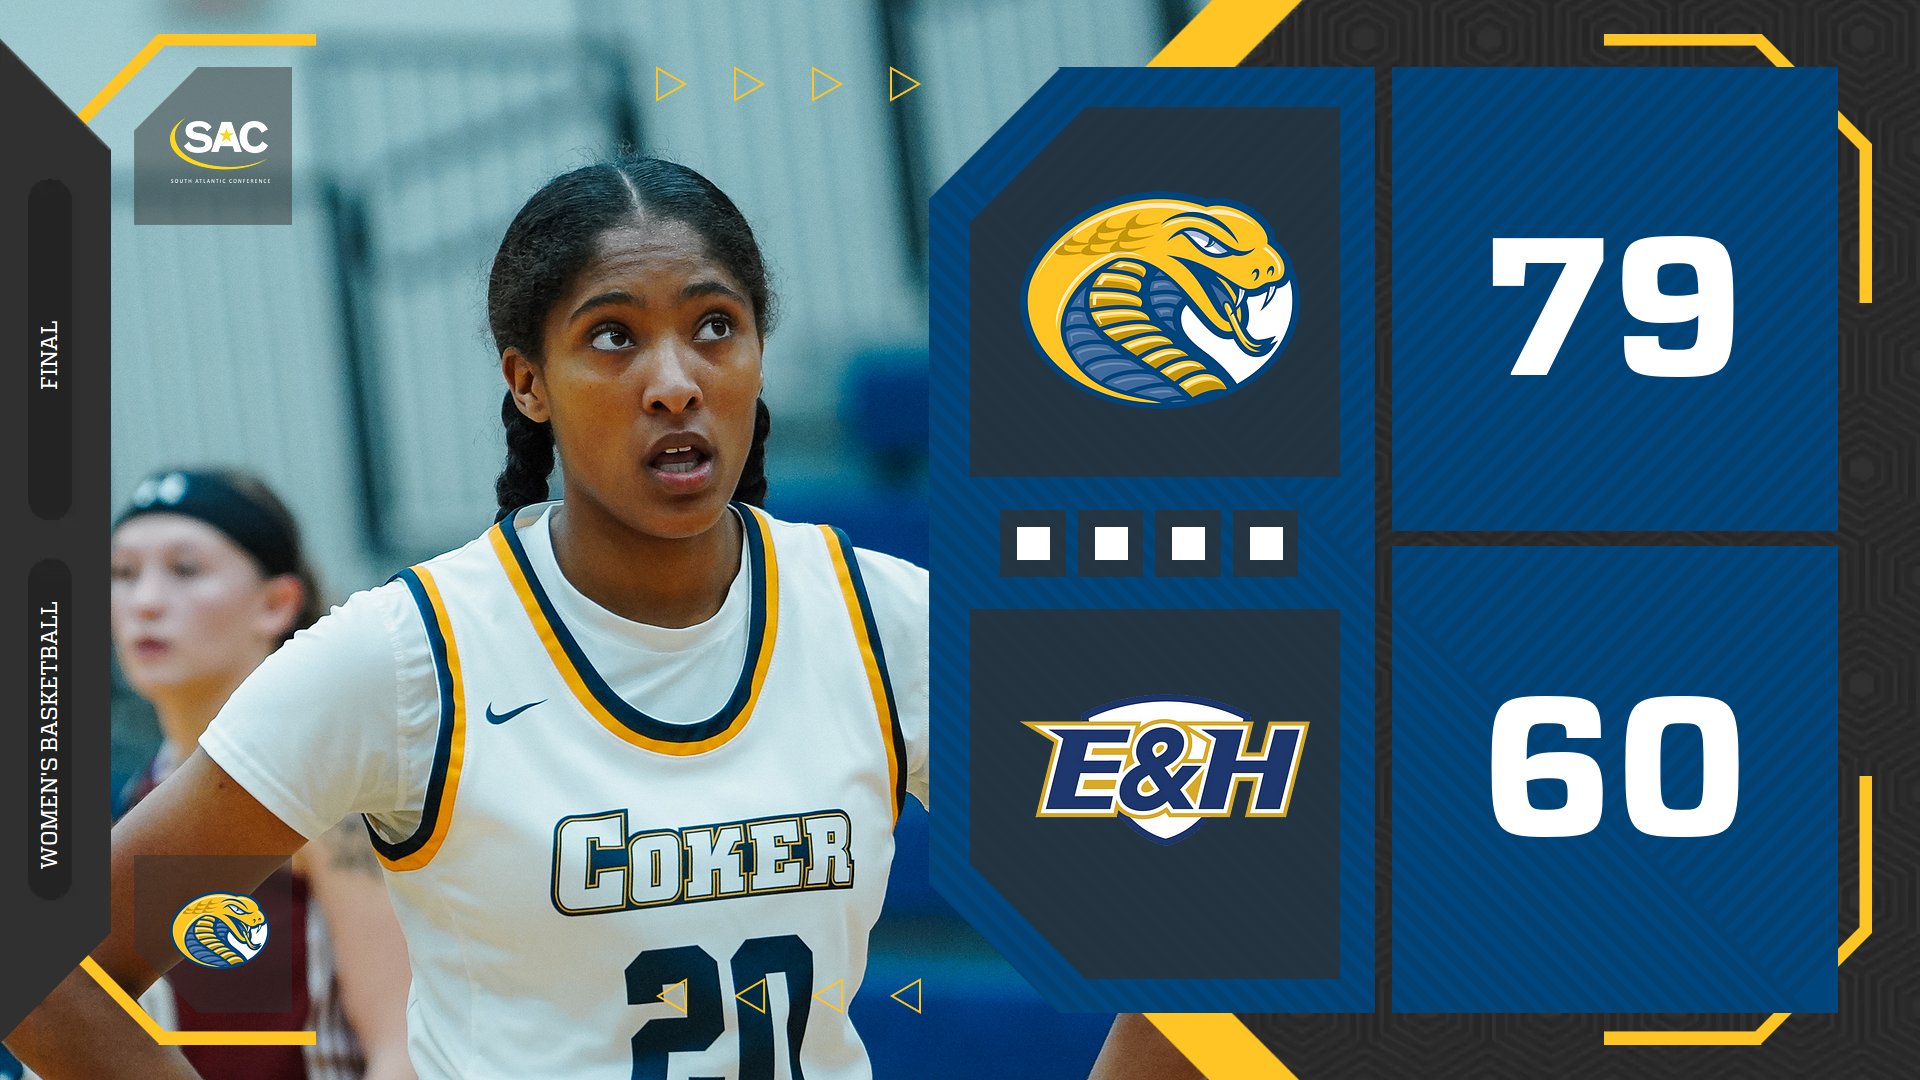 Coker Dominates Emory & Henry in 79-60 Victory